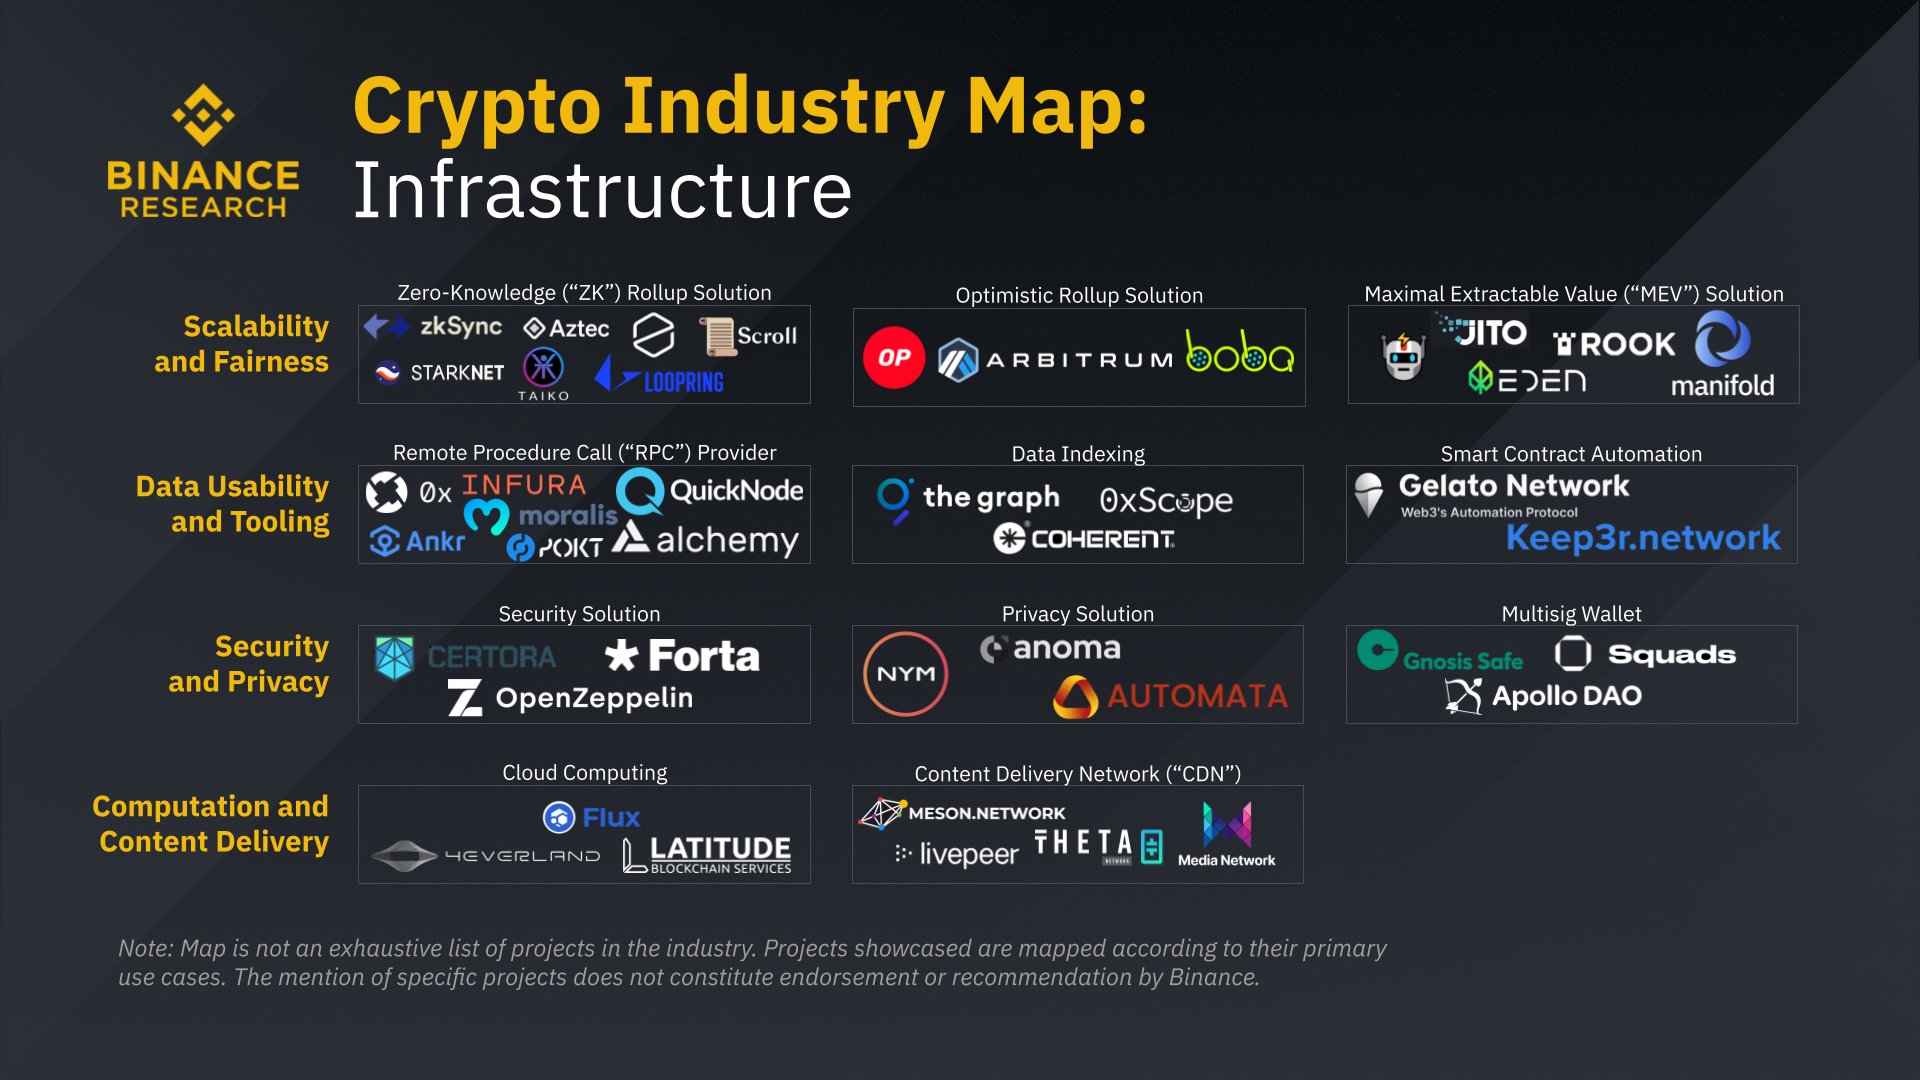 Binance Research Crypto Industry Map